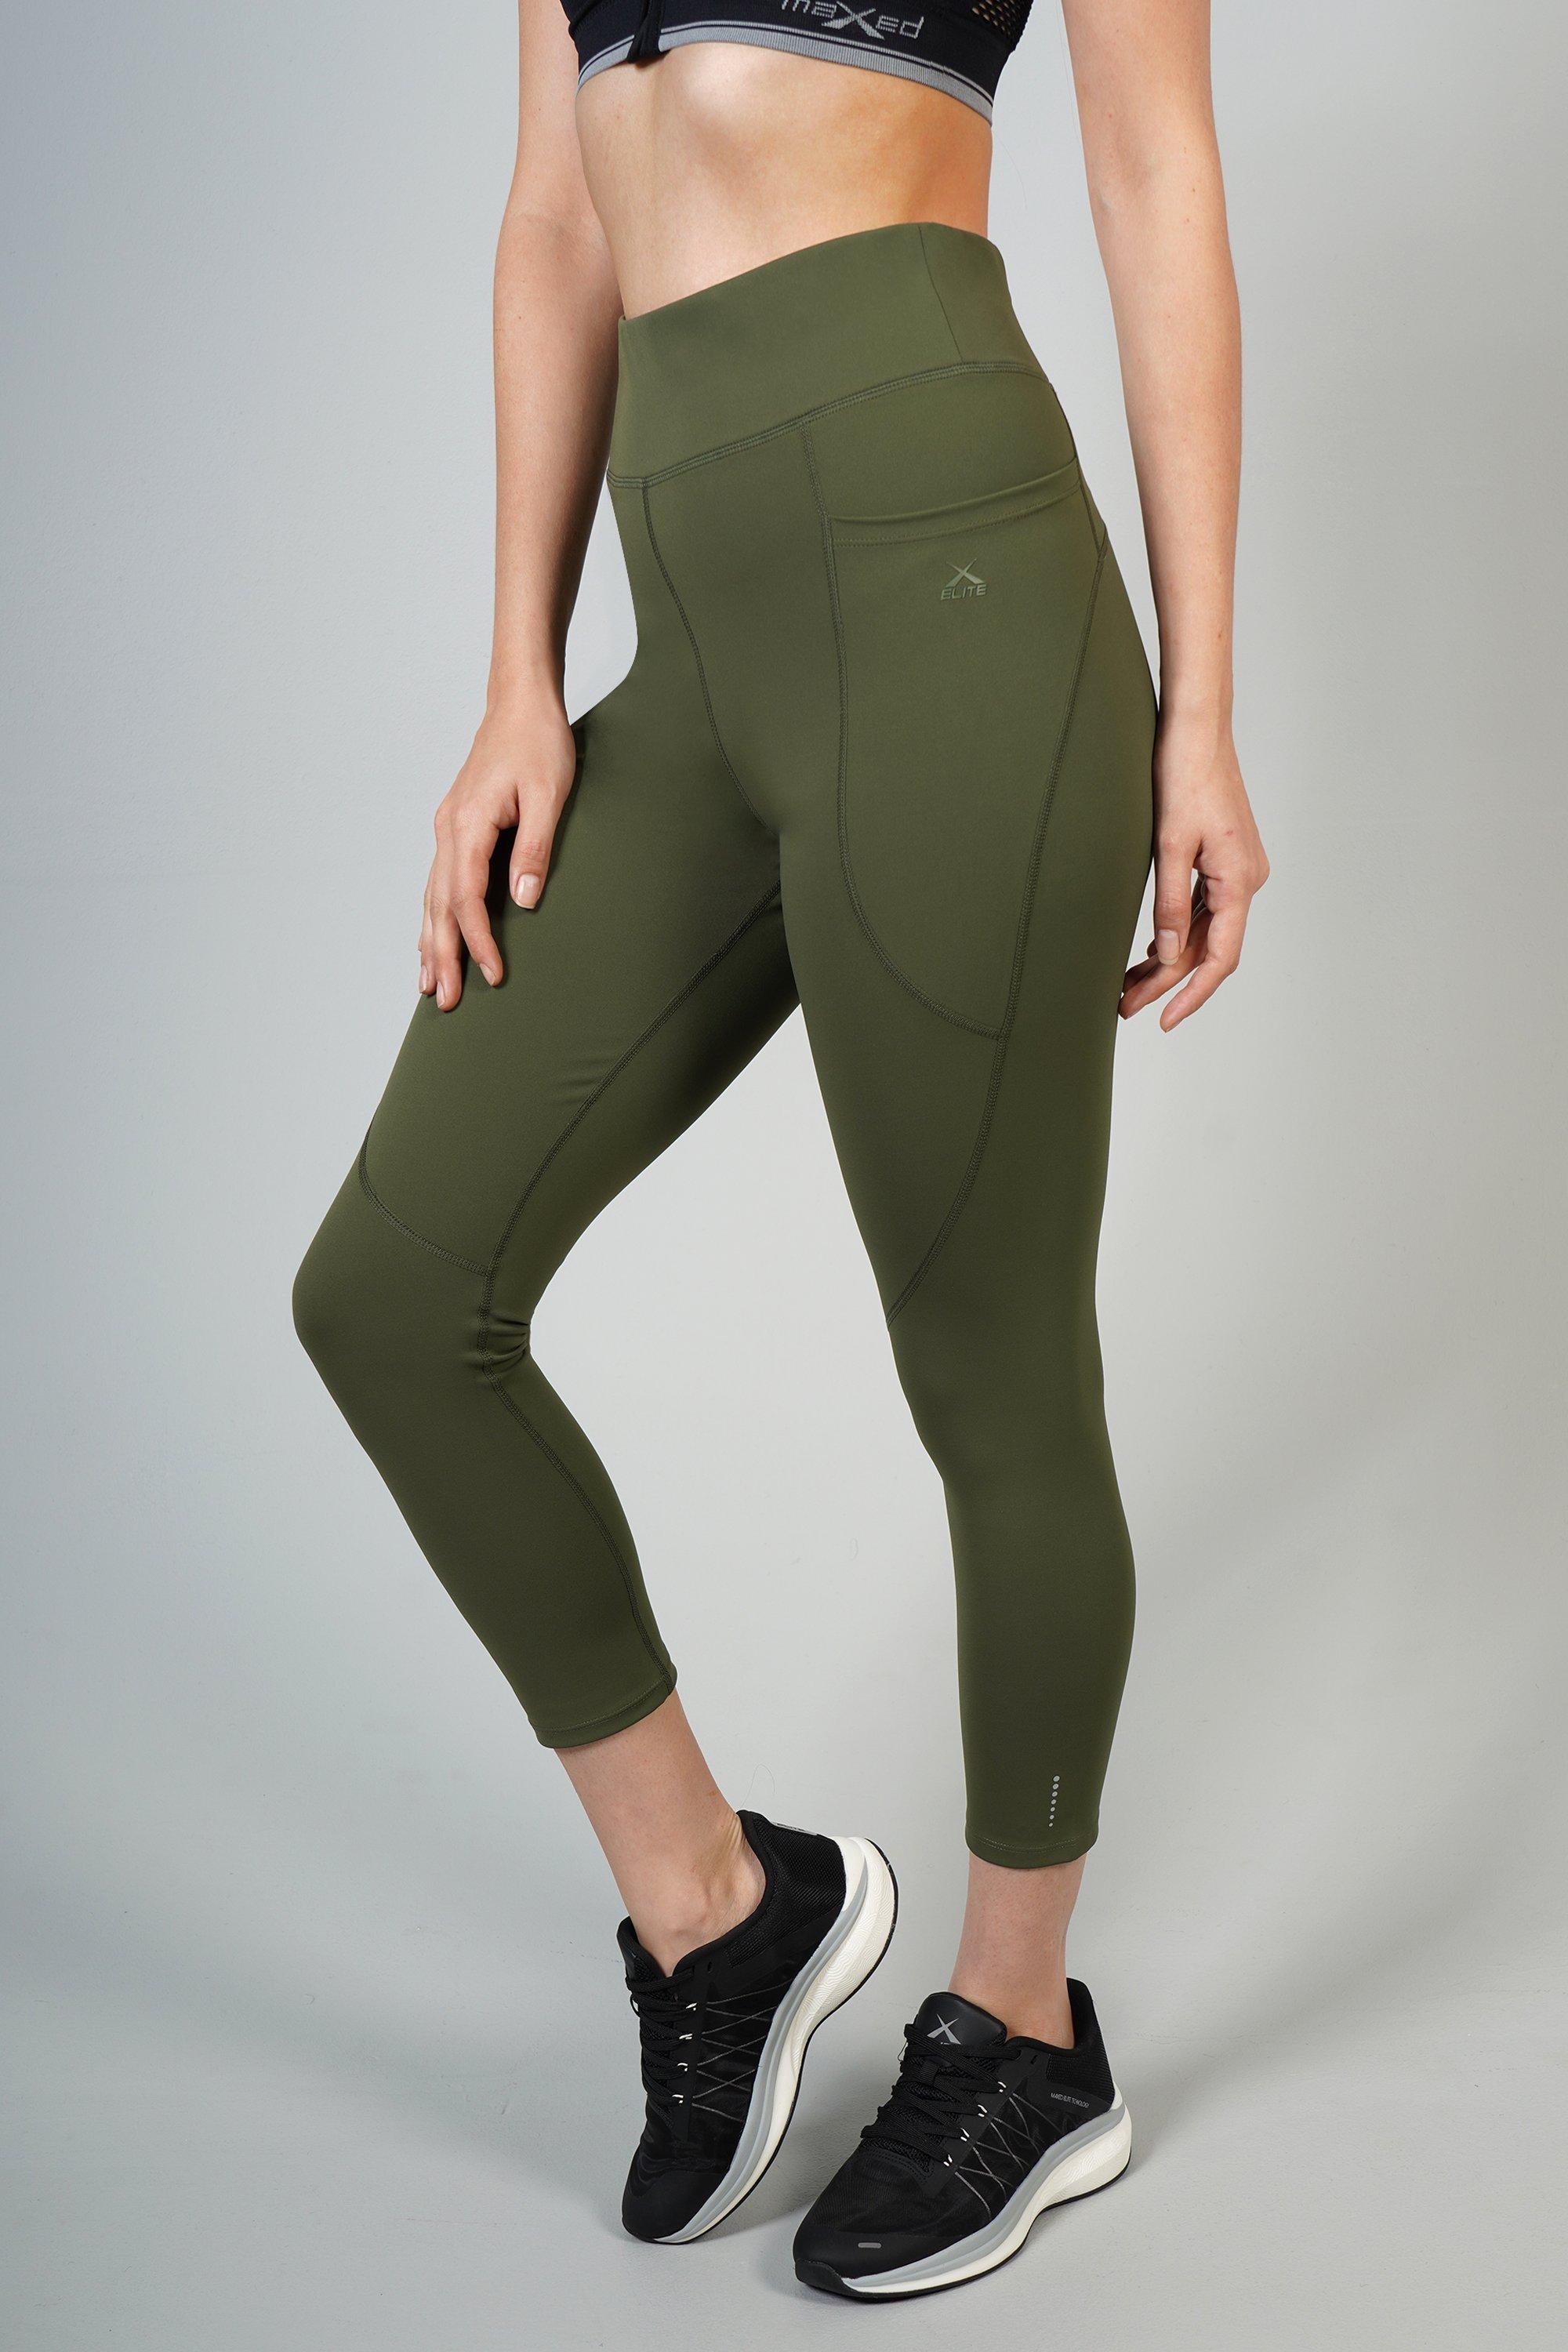 Mr Price Leggings For Ladies  International Society of Precision  Agriculture